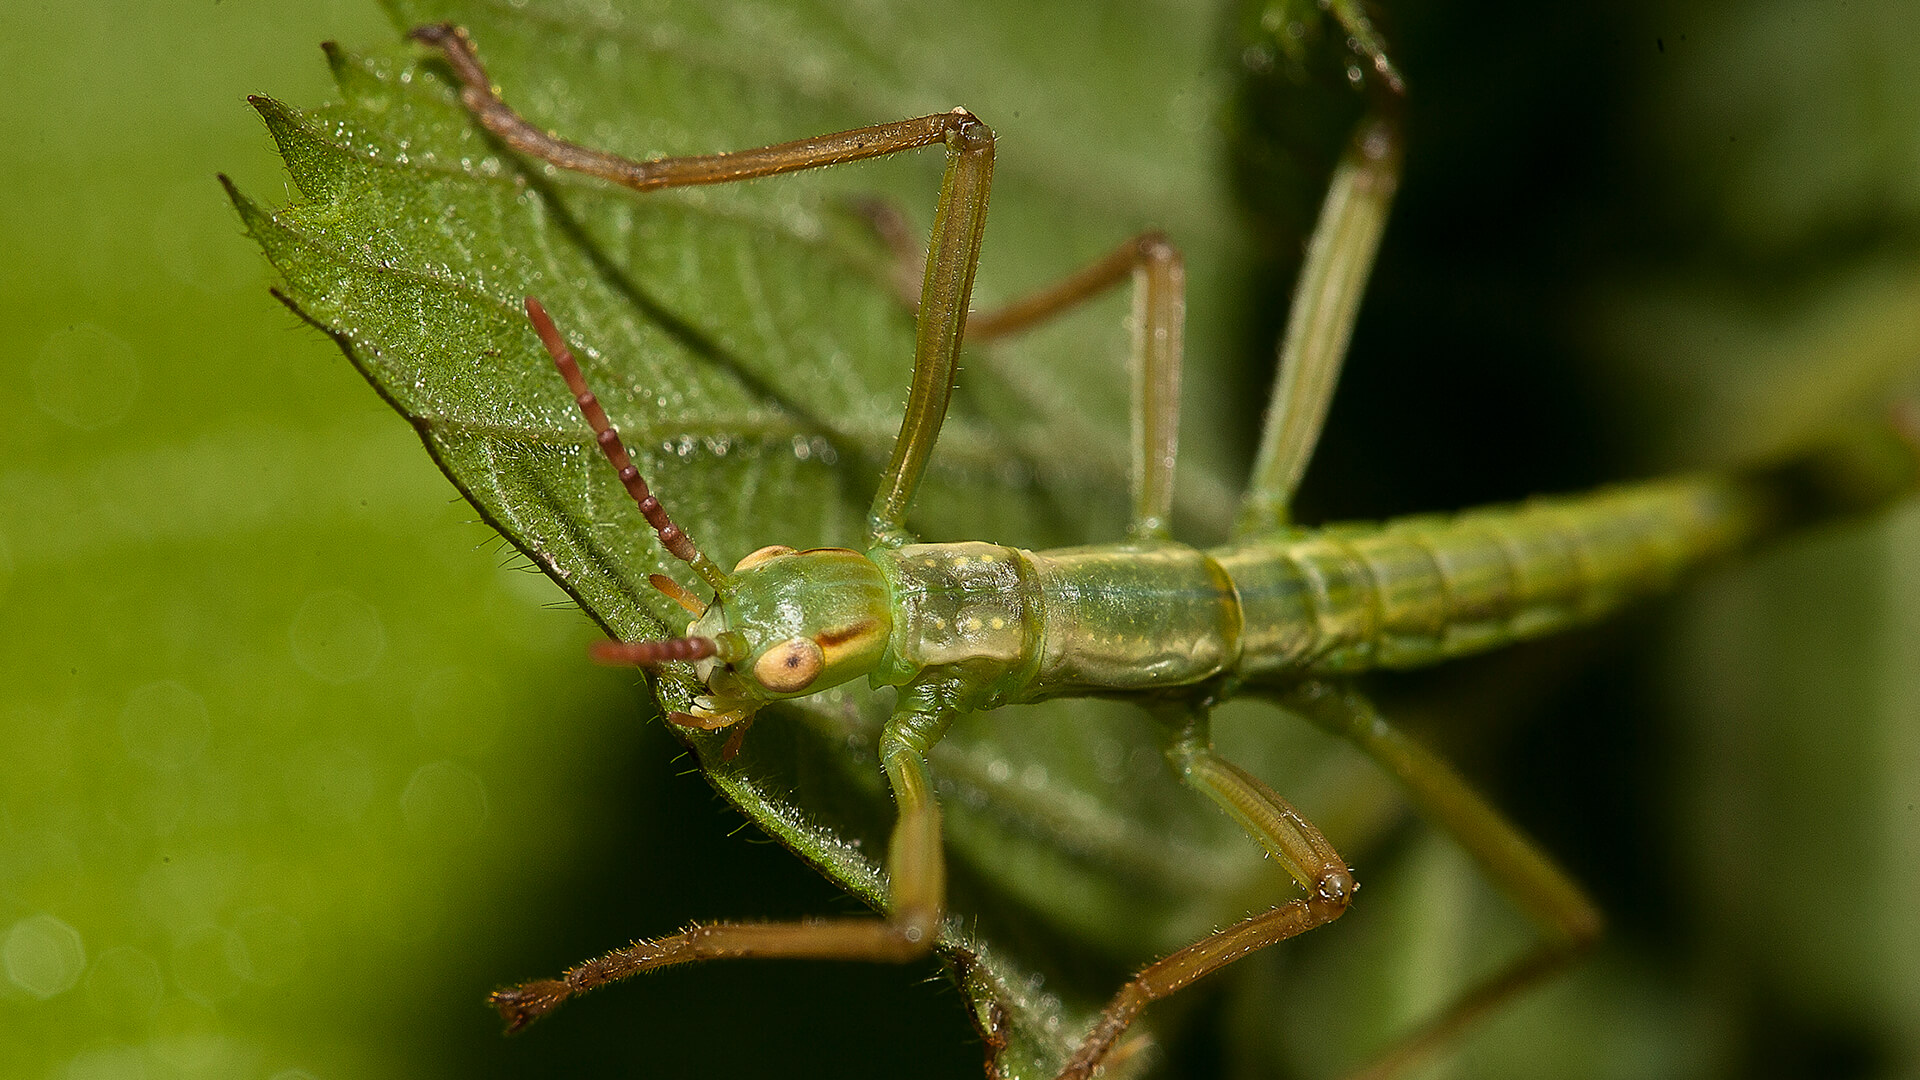 Juvenile Lord Howe island stick insect on green leaf